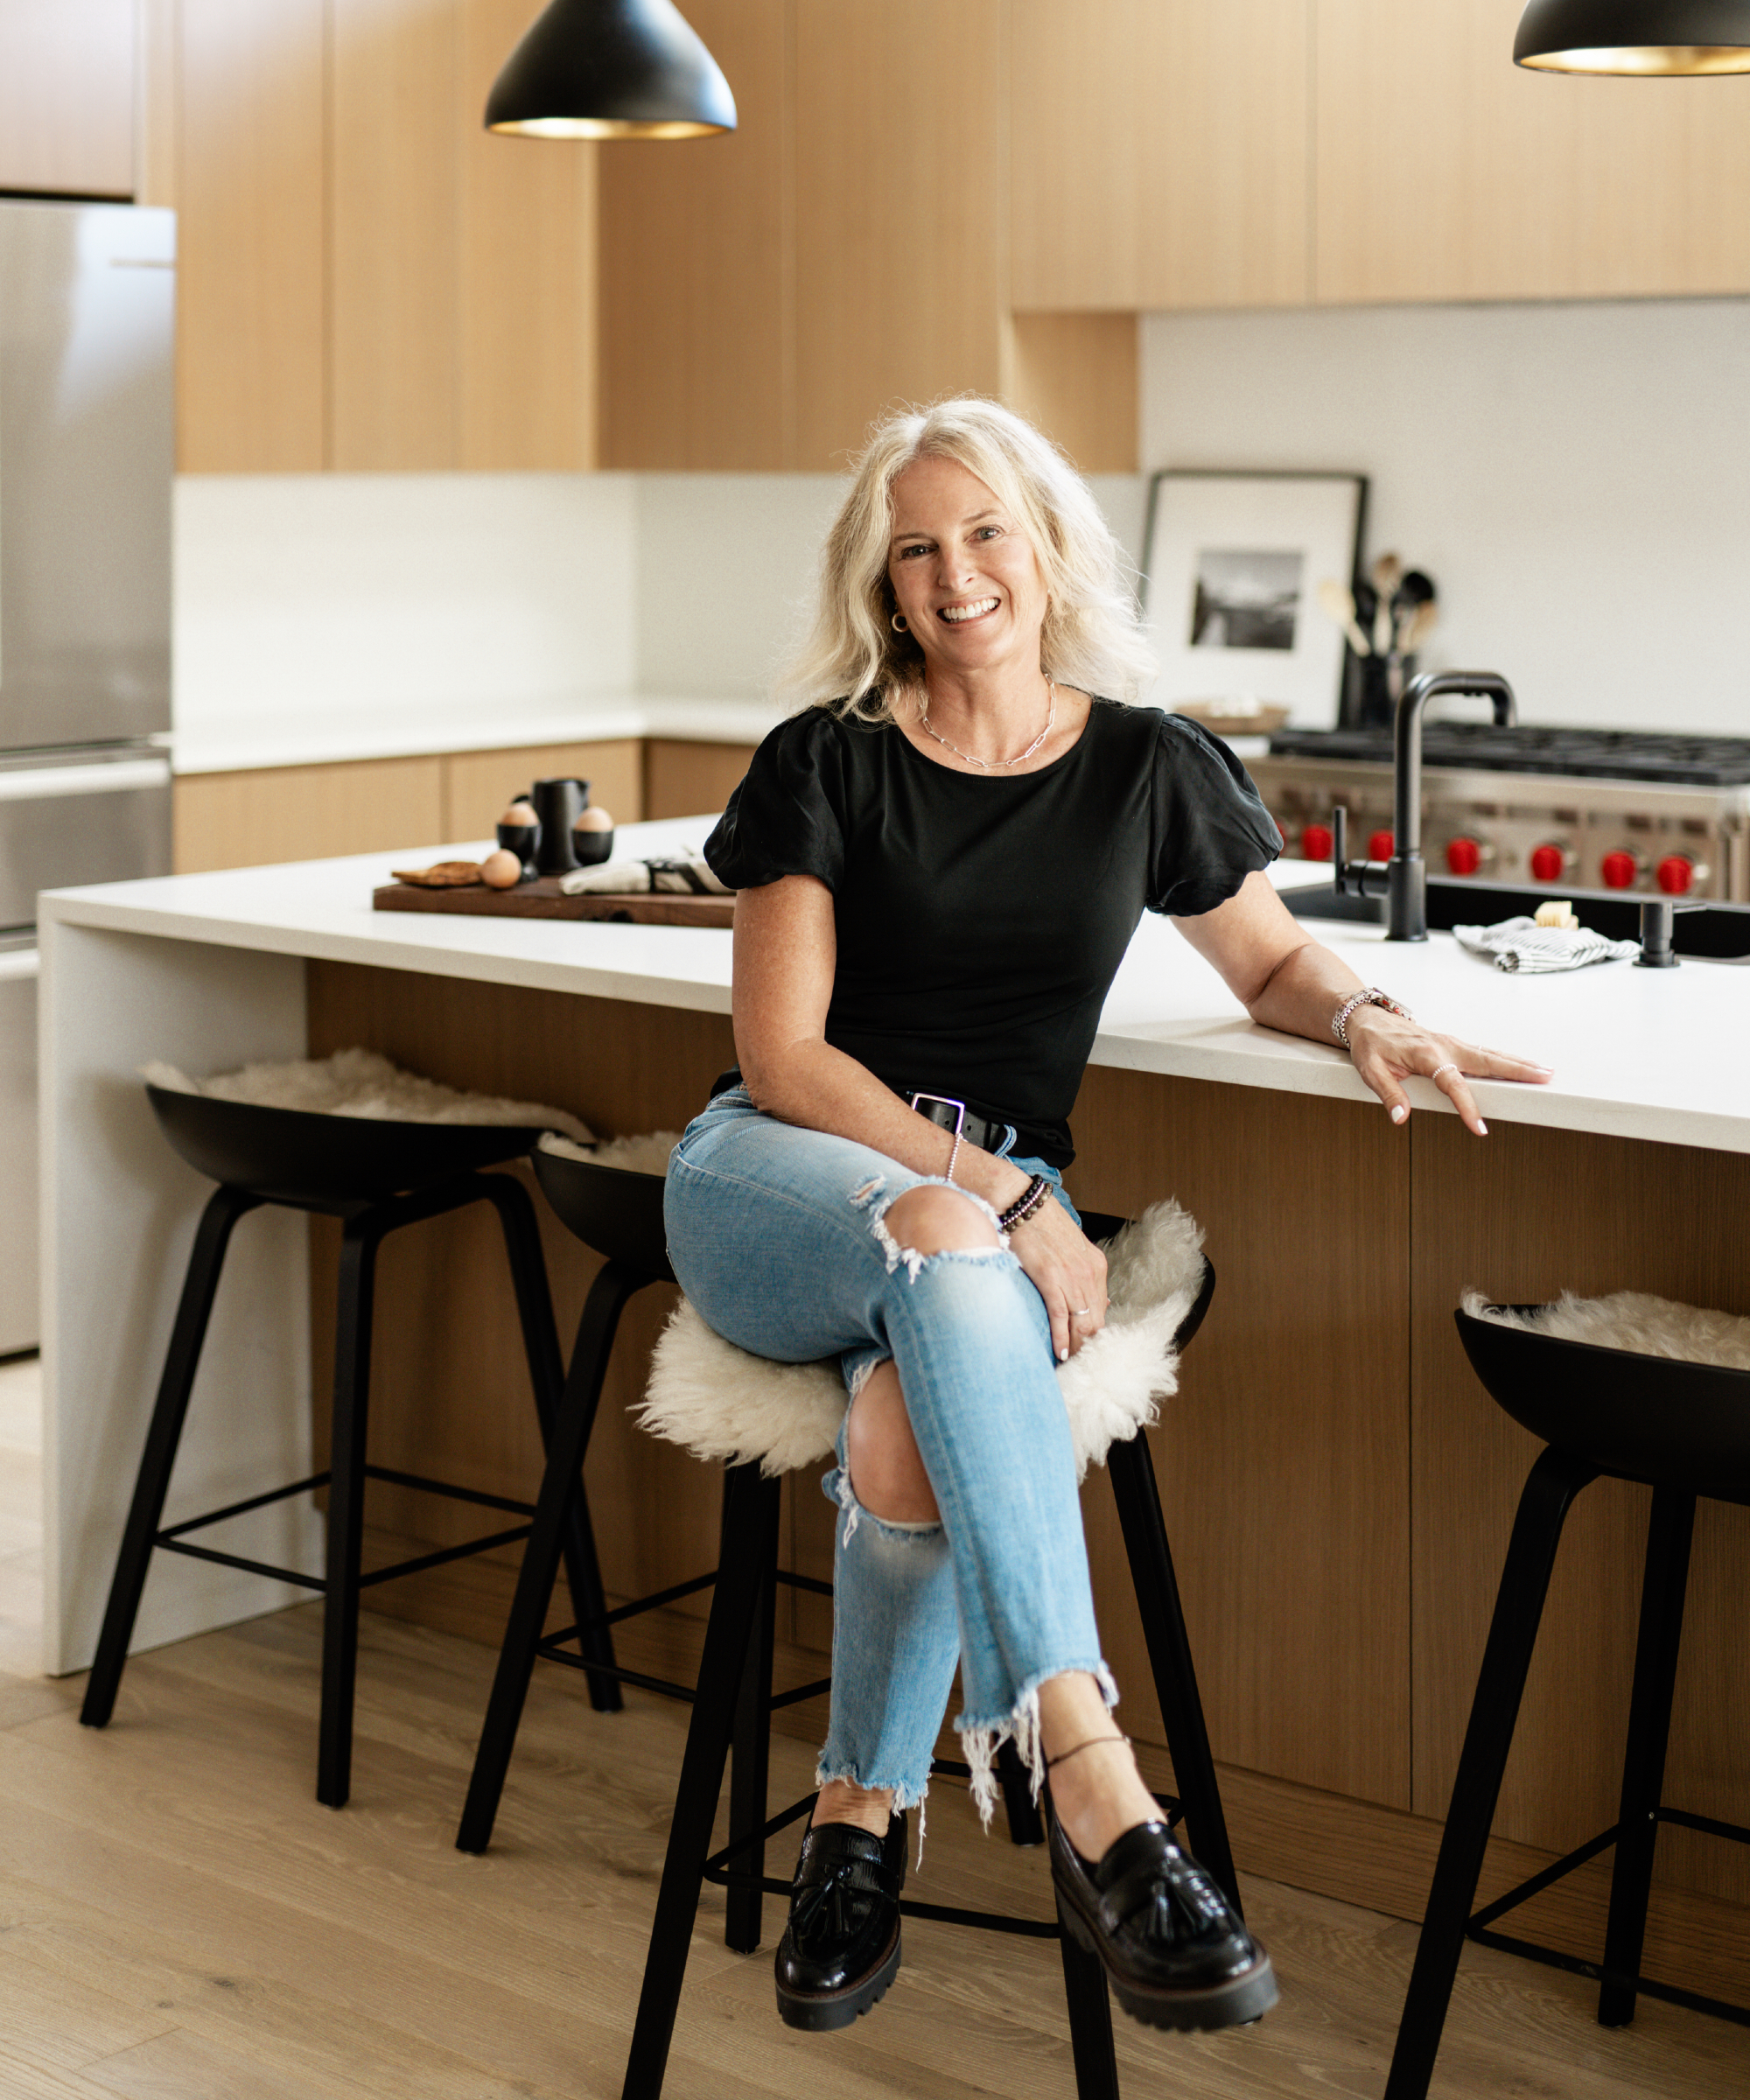 image of Shelagh Conway Triple Heart Design, blond woman wearing black top and jeans in a wood and white kitchen